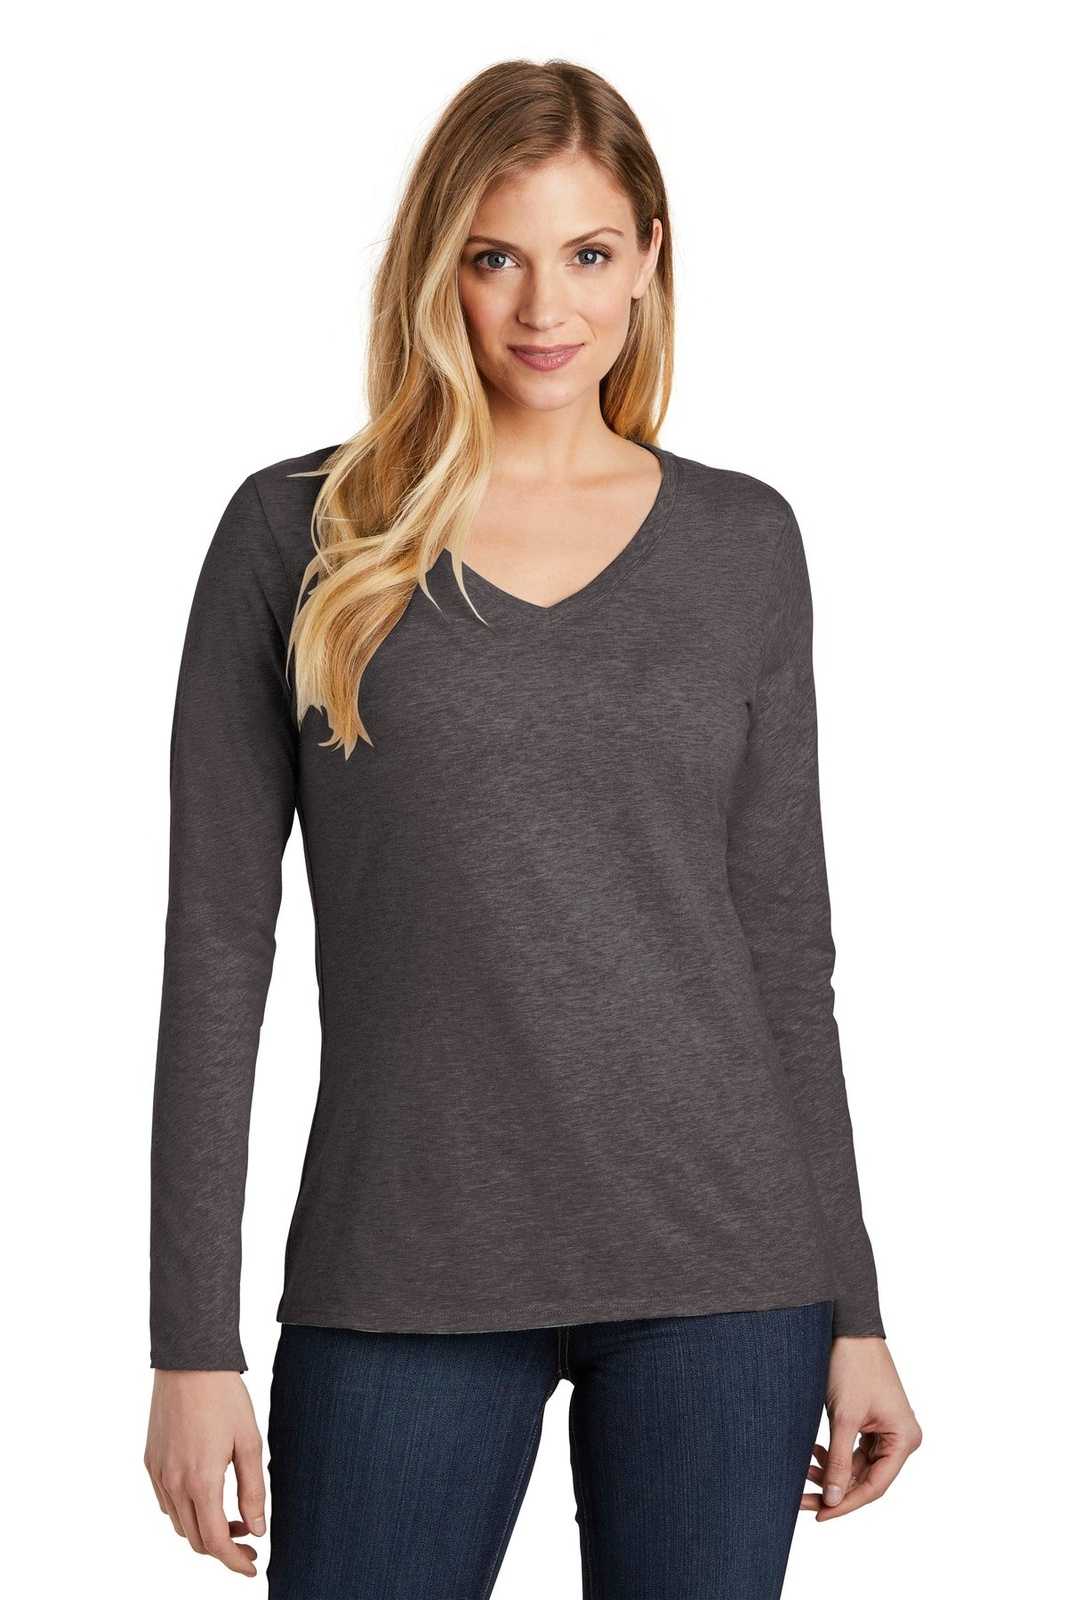 District DT6201 Women's Very Important Tee Long Sleeve V-Neck - Heathered Charcoal - HIT a Double - 1